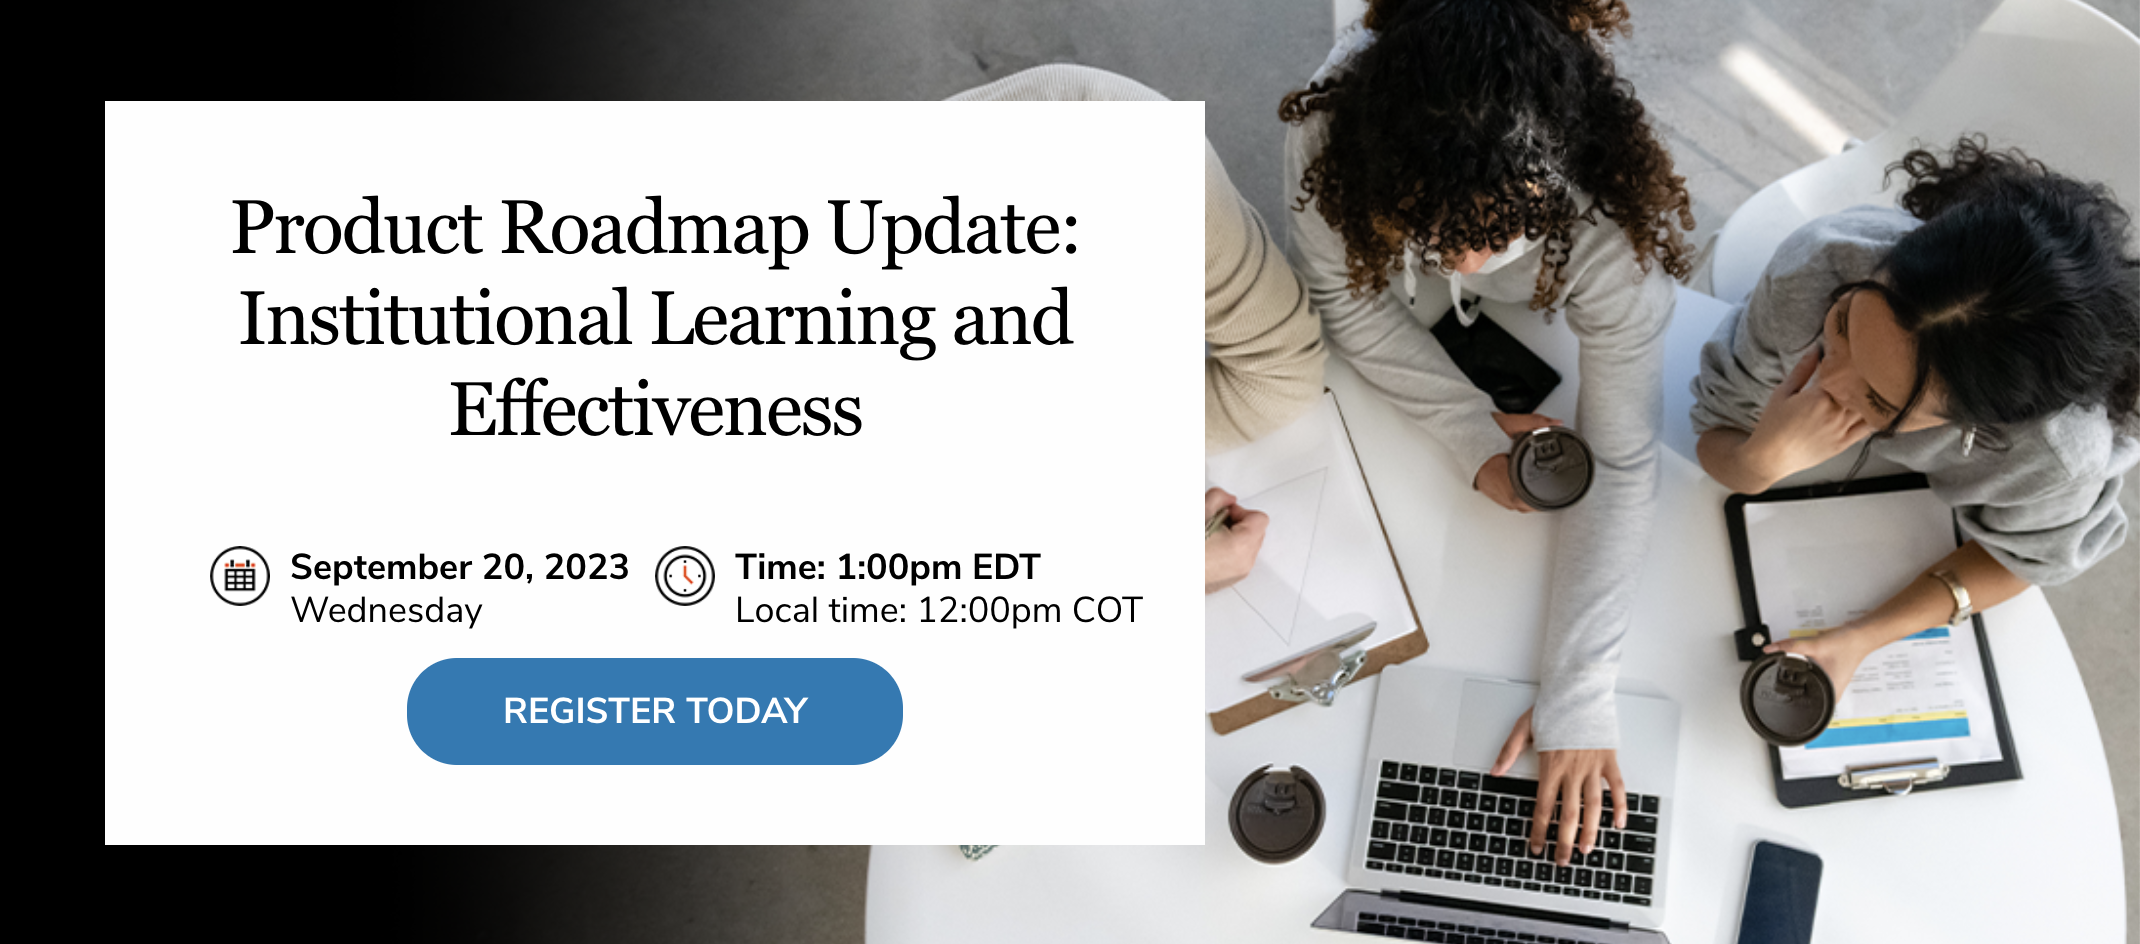 Product Roadmap Update: Institutional Learning and Effectiveness 2493